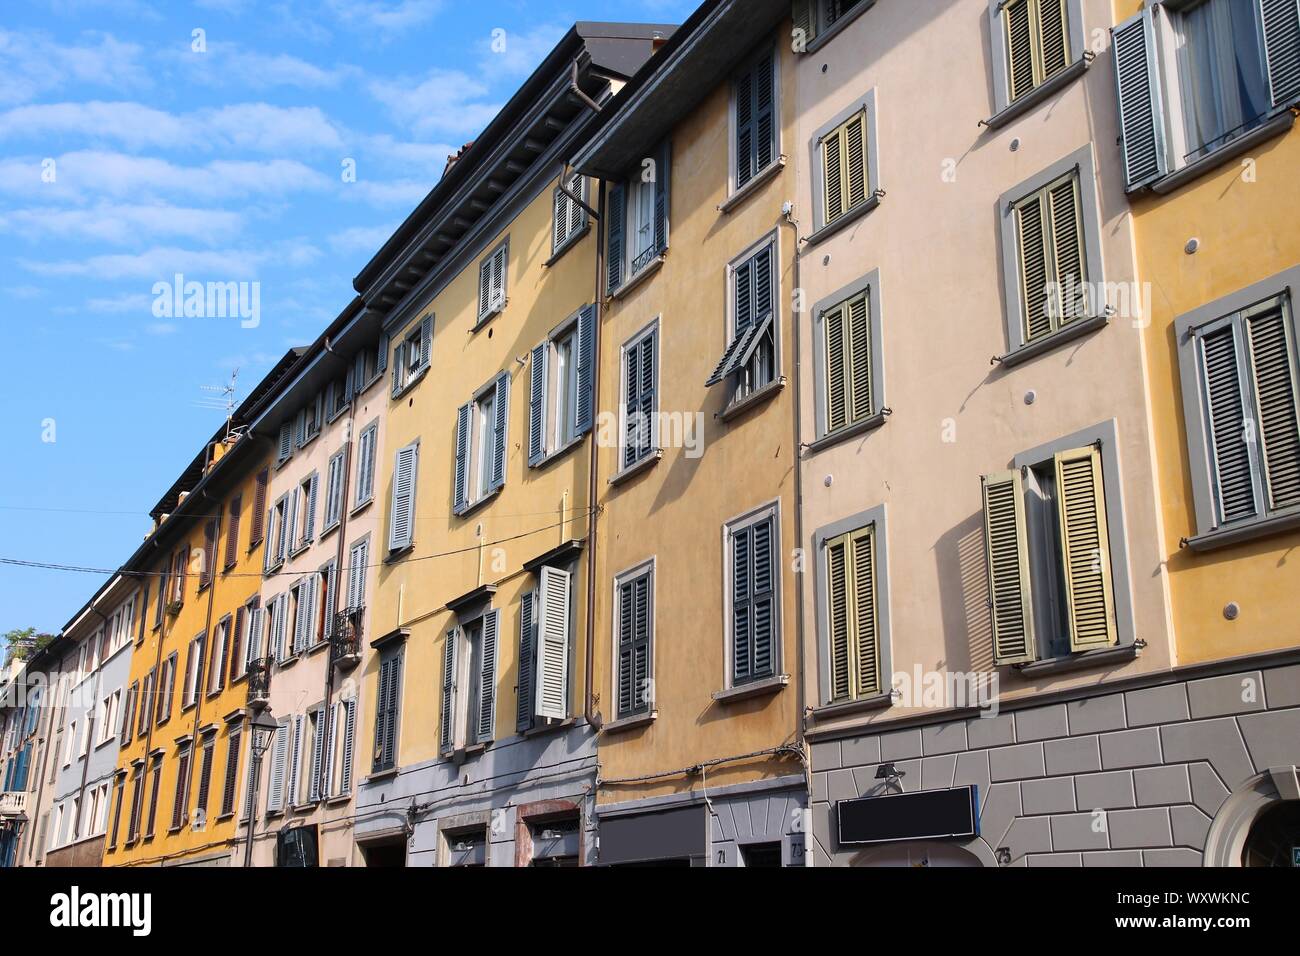 Bergamo in Lombardy, Italy - old apartment buildings architecture. Stock Photo